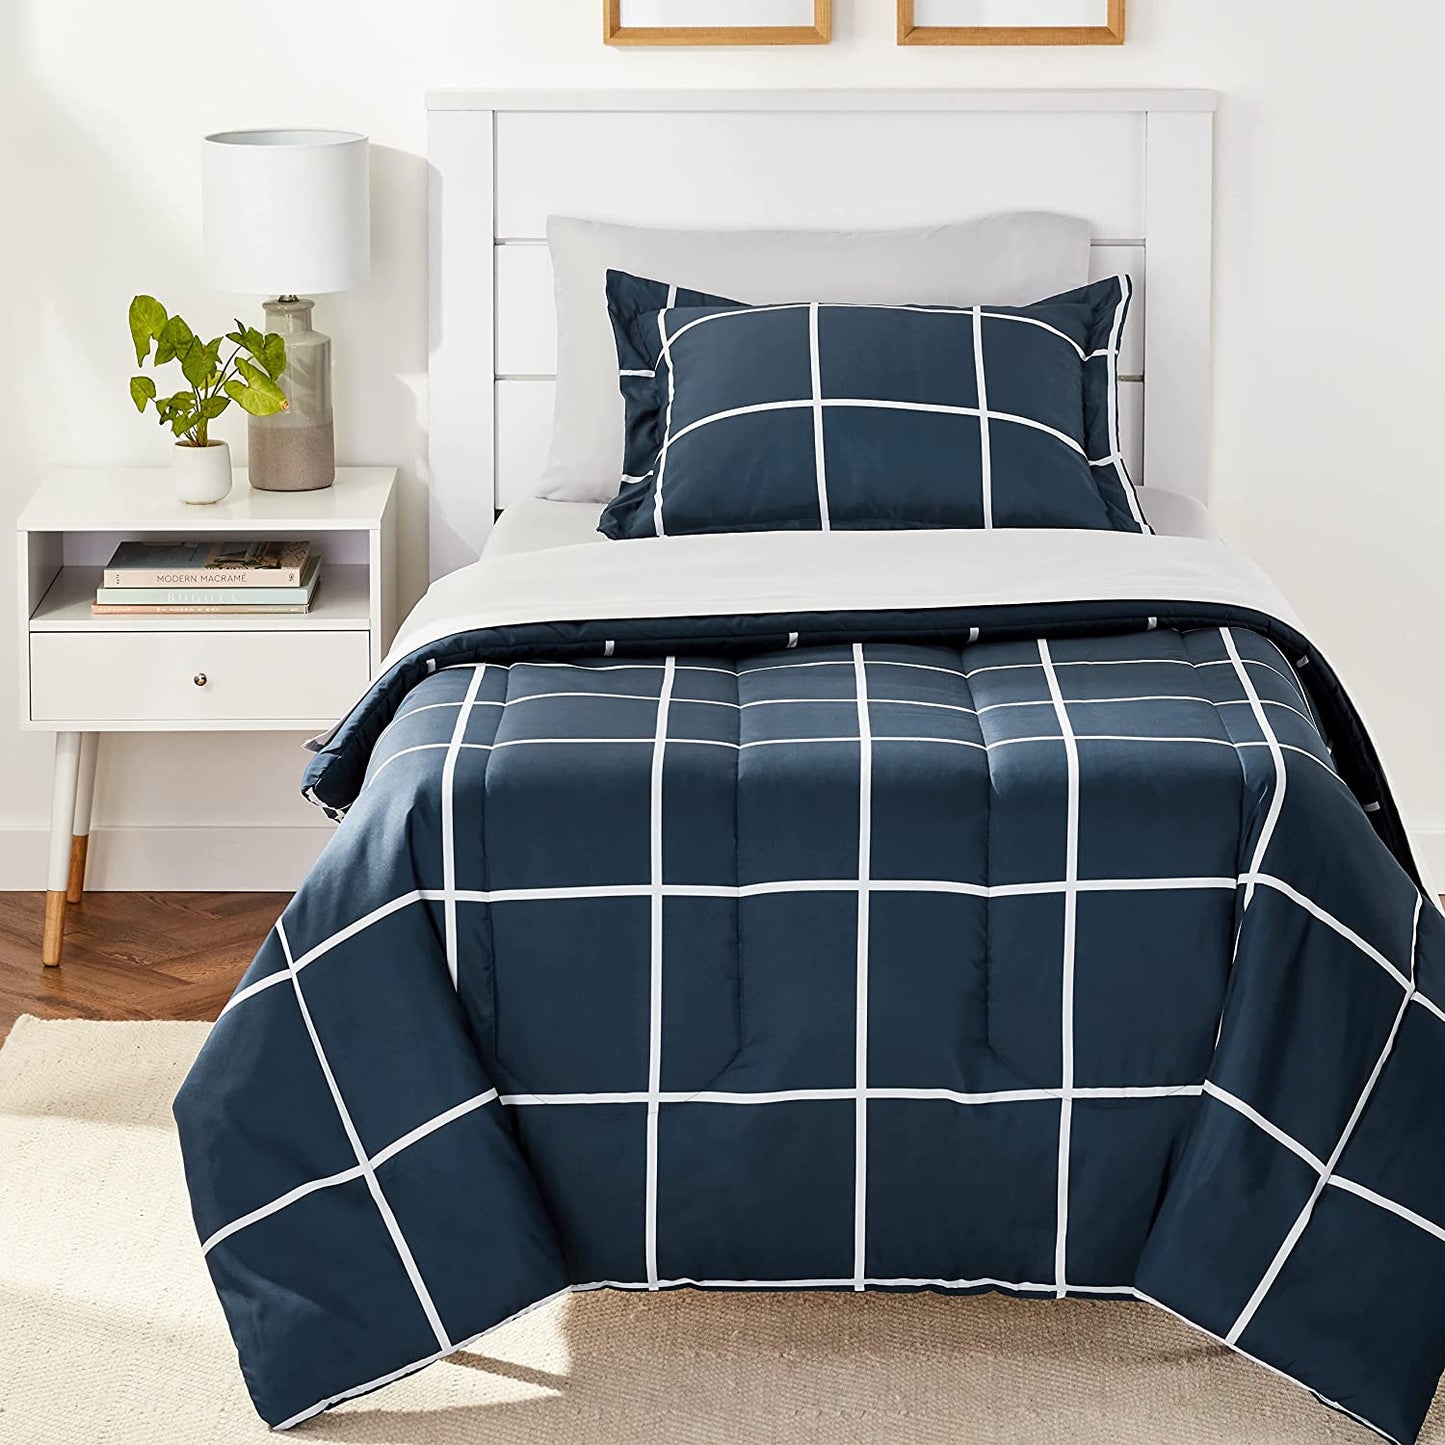 Lightweight Microfiber Bed-In-A-Bag Comforter 5-Piece Bedding Set, Twin/Twin XL, Navy with Simple Plaid